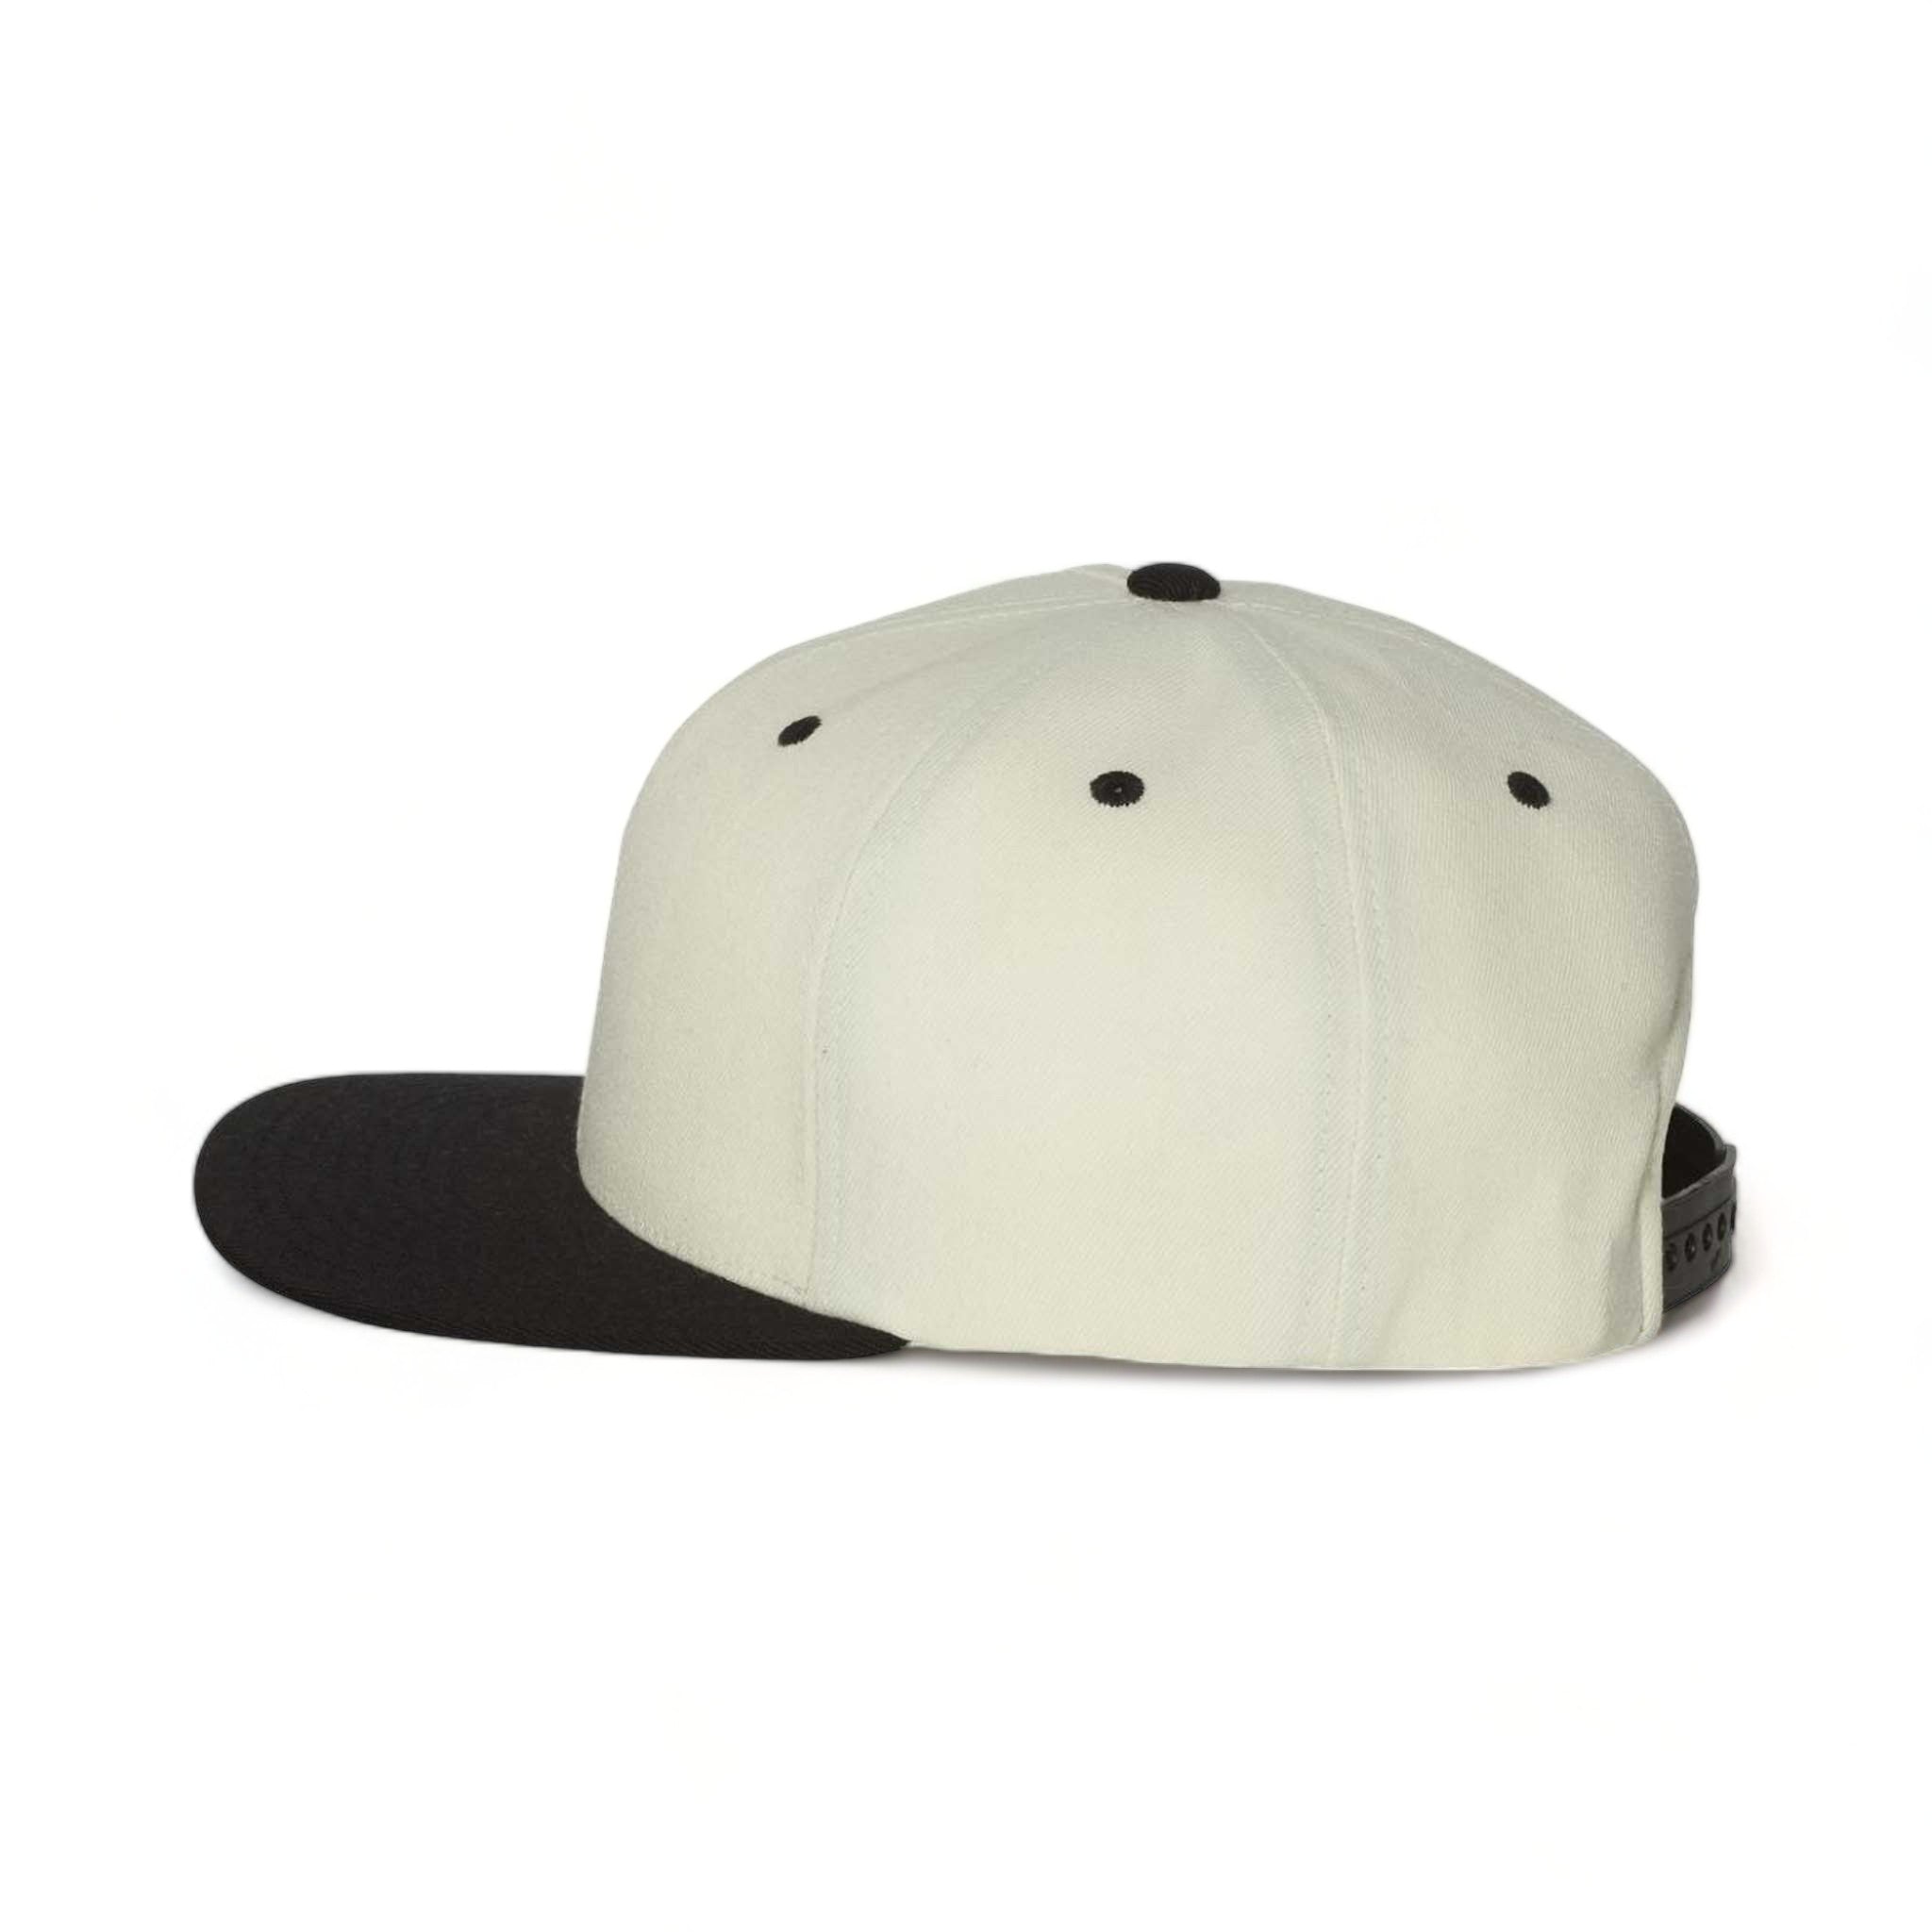 Side view of Flexfit 110F custom hat in natural and black